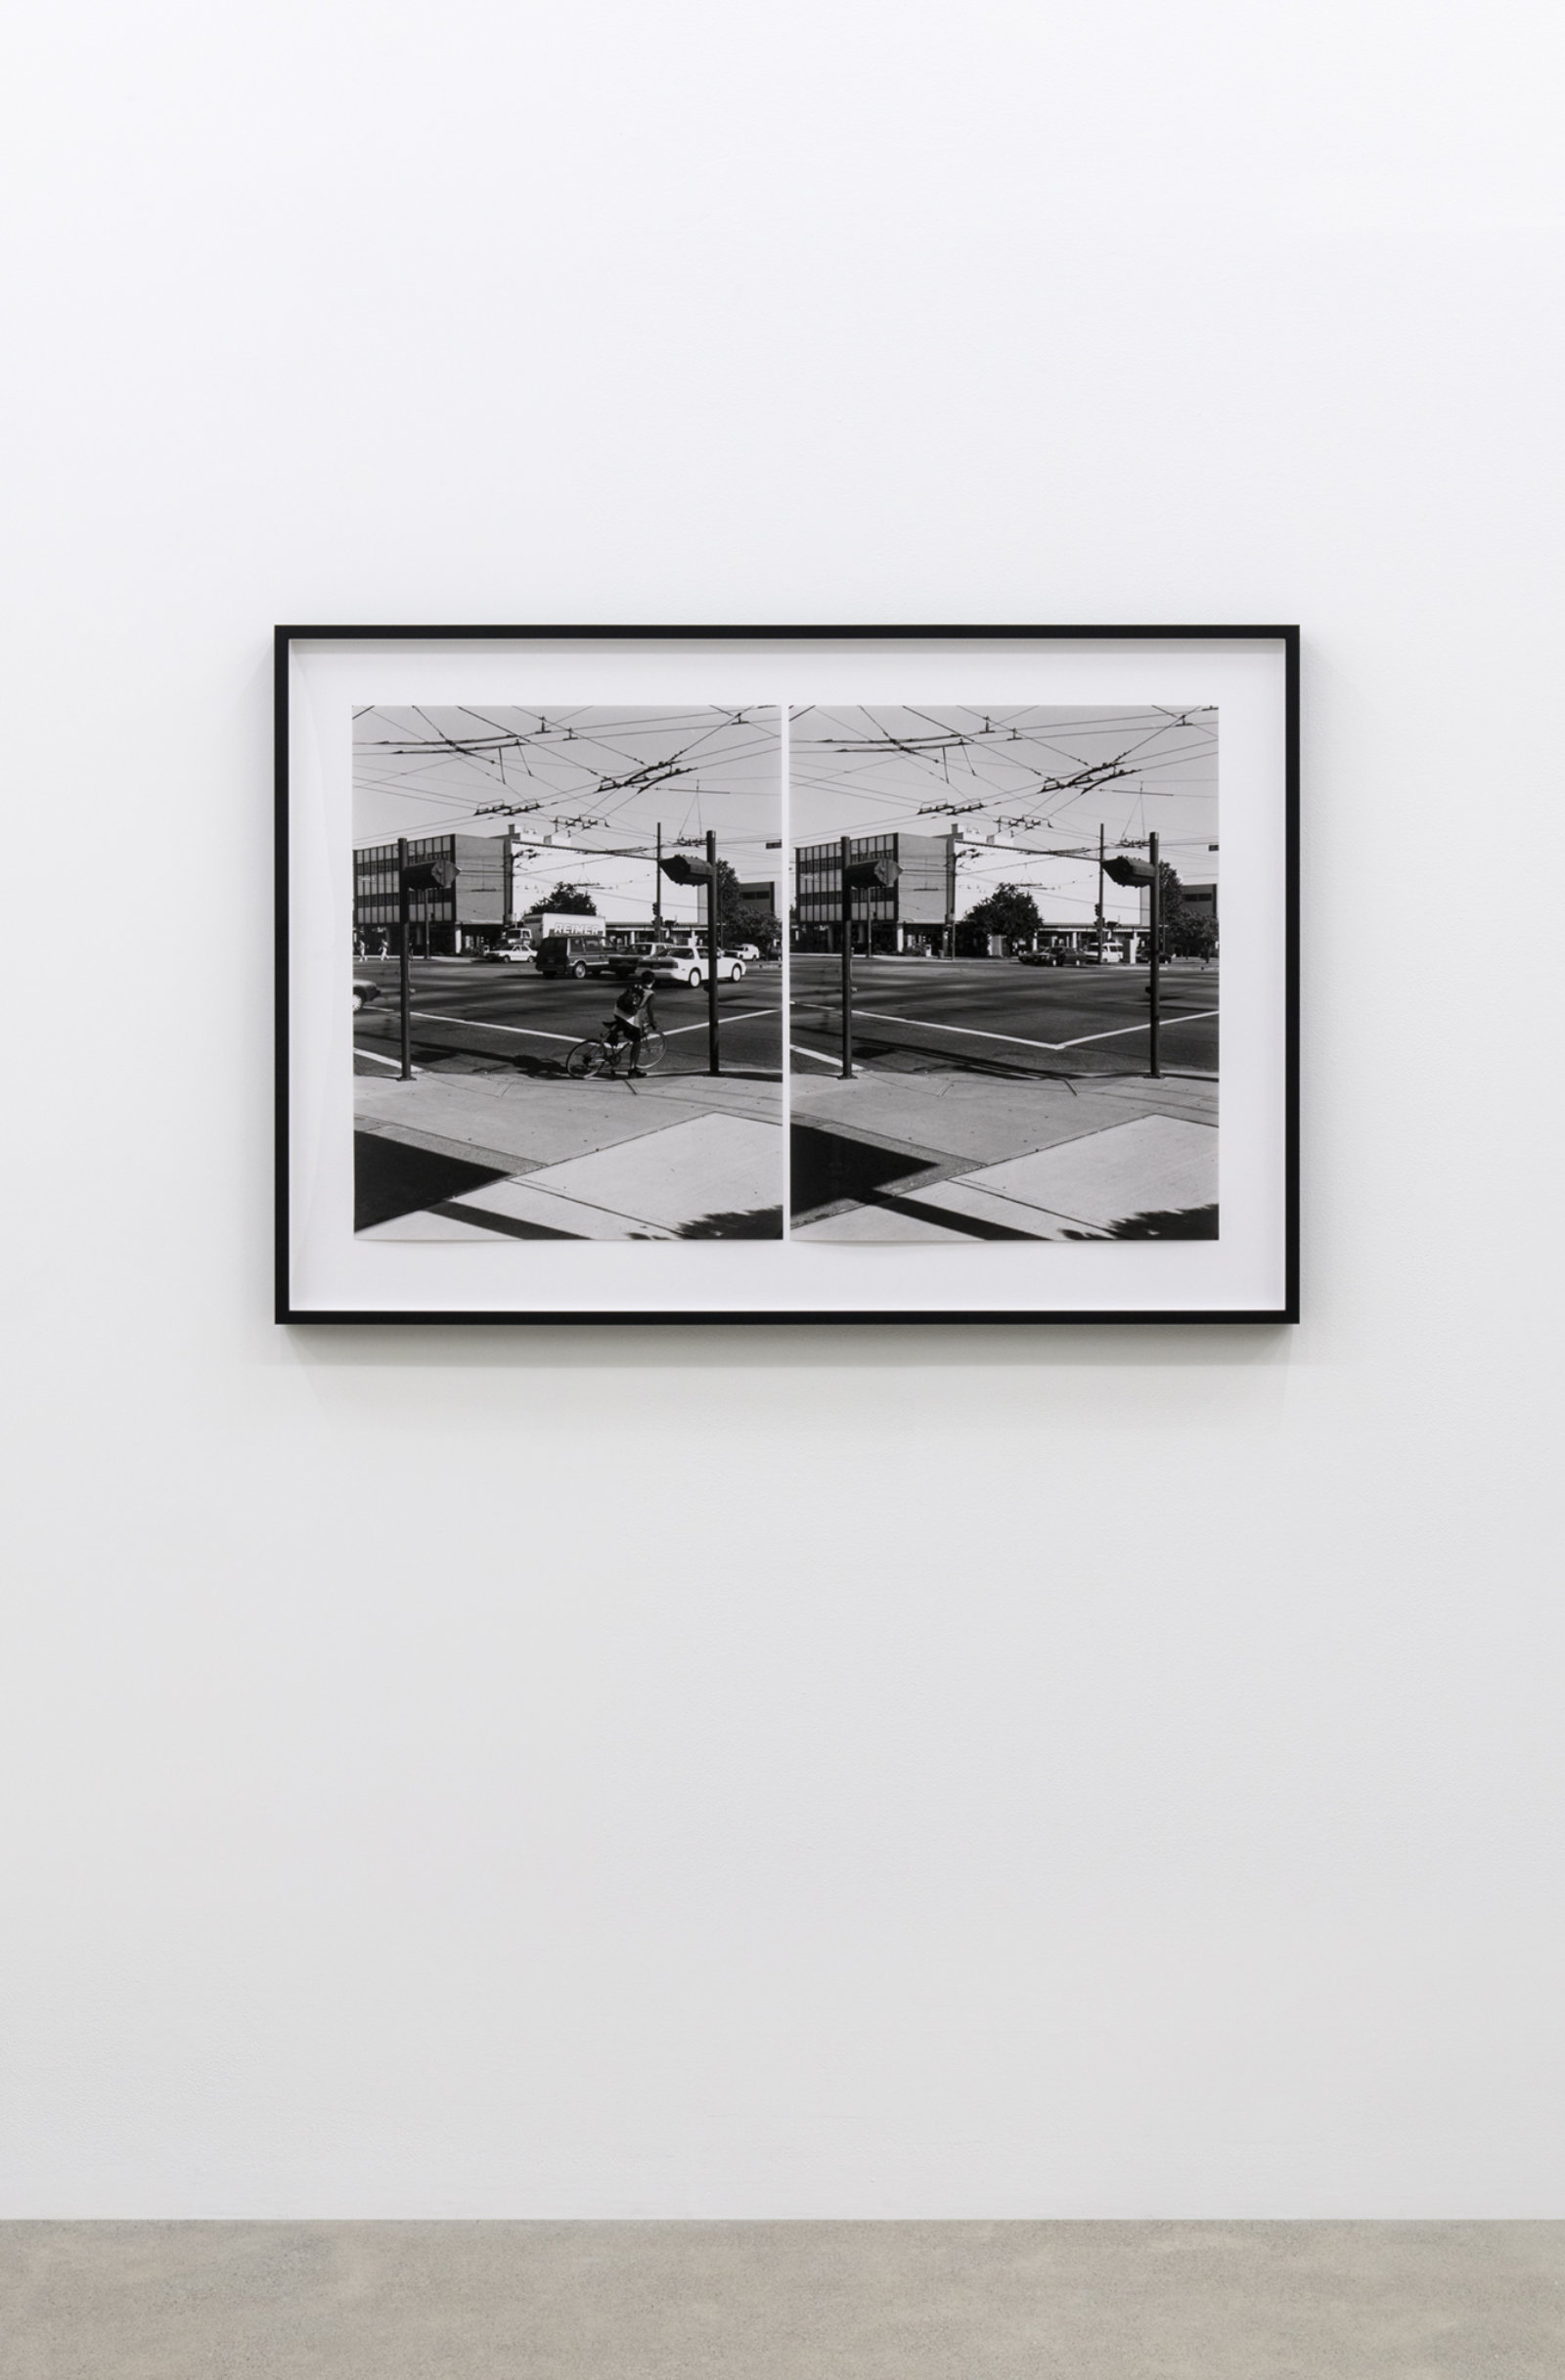 Ian Wallace, Intersection (Cambie and 41st Street), 1996, two black and white photographs, 23 x 19 in. (60 x 48 cm)